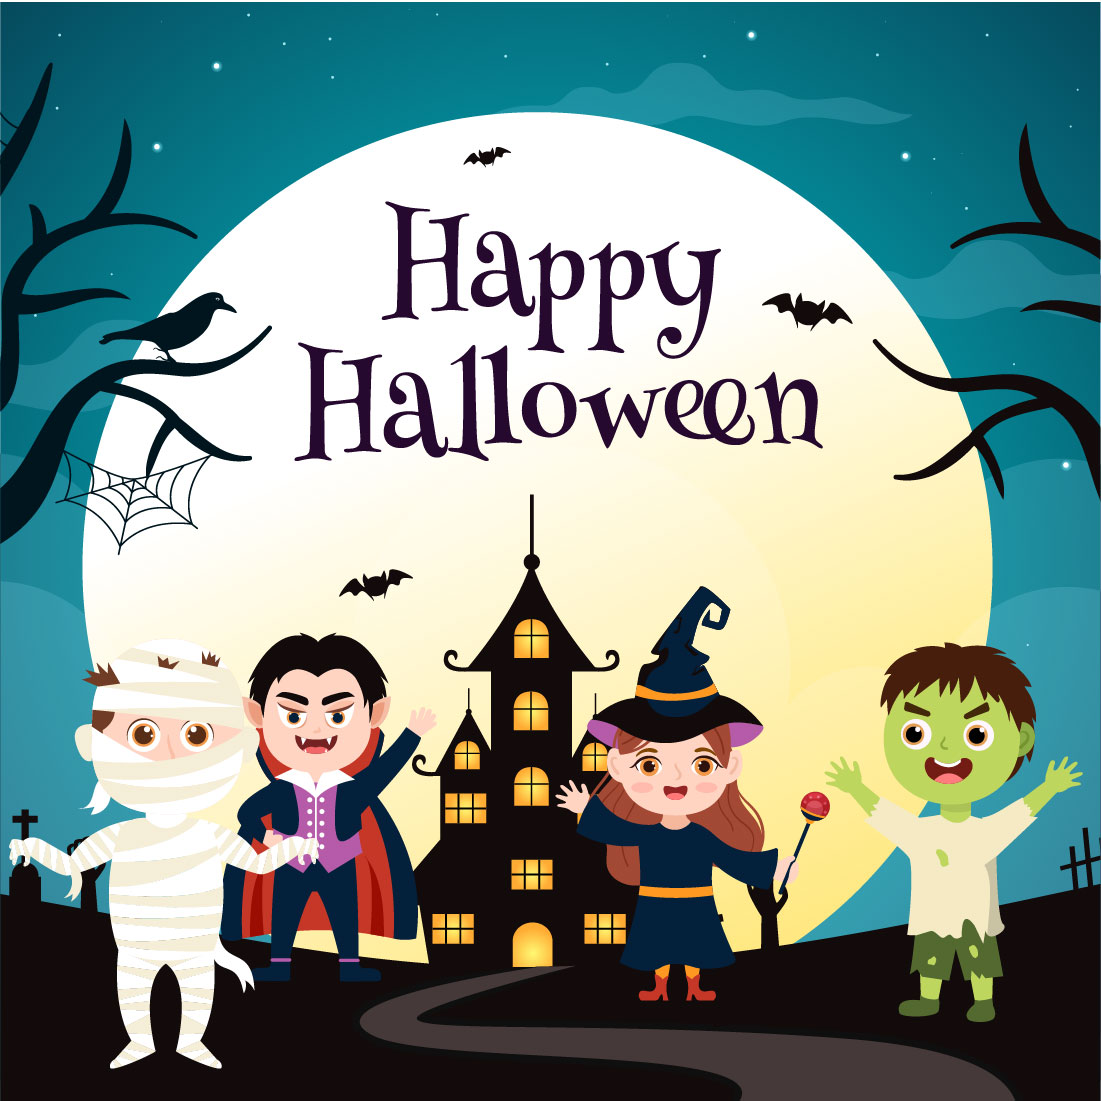 20 Happy Halloween Illustration Preview Image.